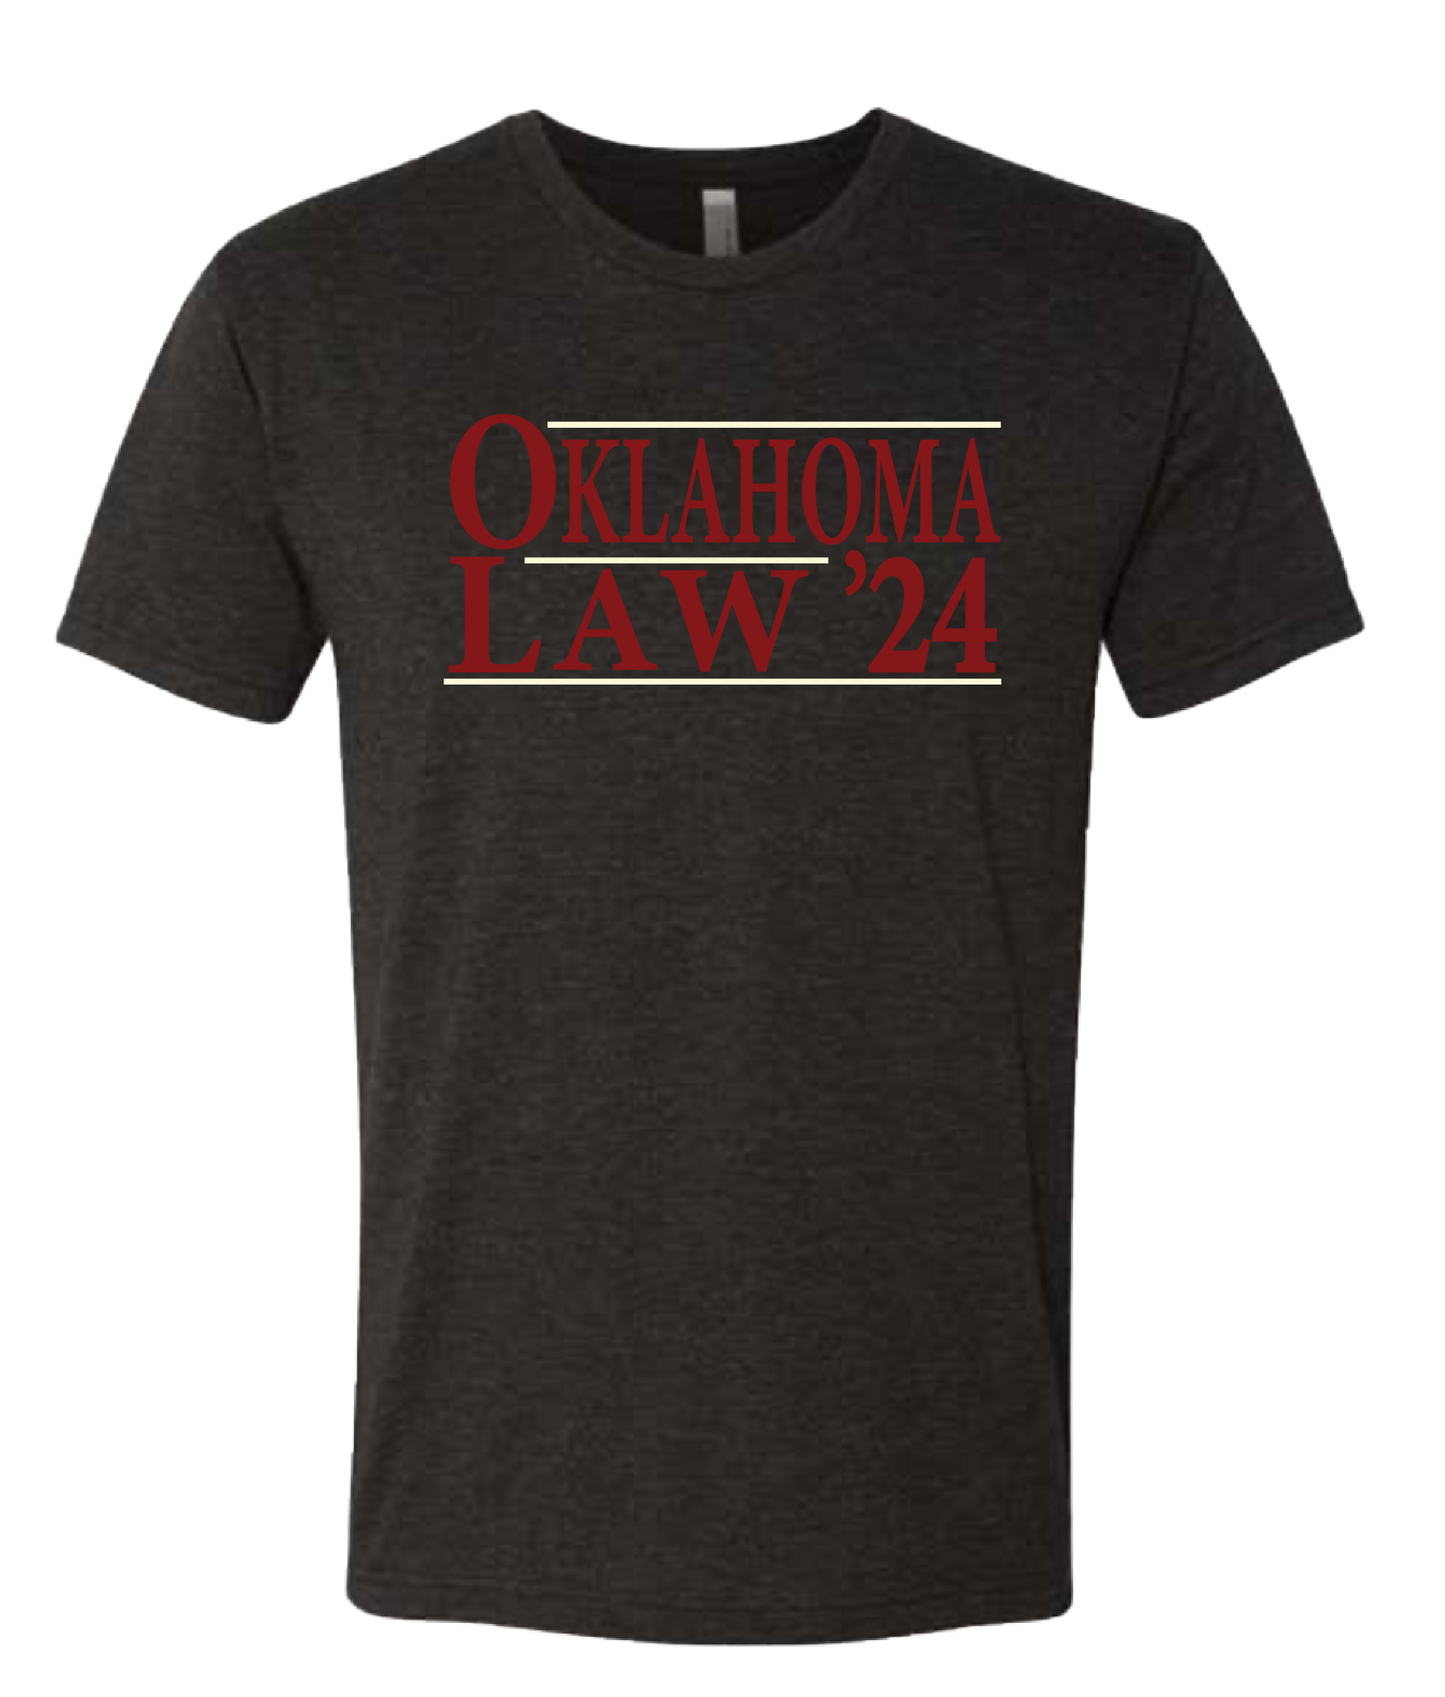 Oklahoma Law '24 campaign style (can customize year) t-shirt